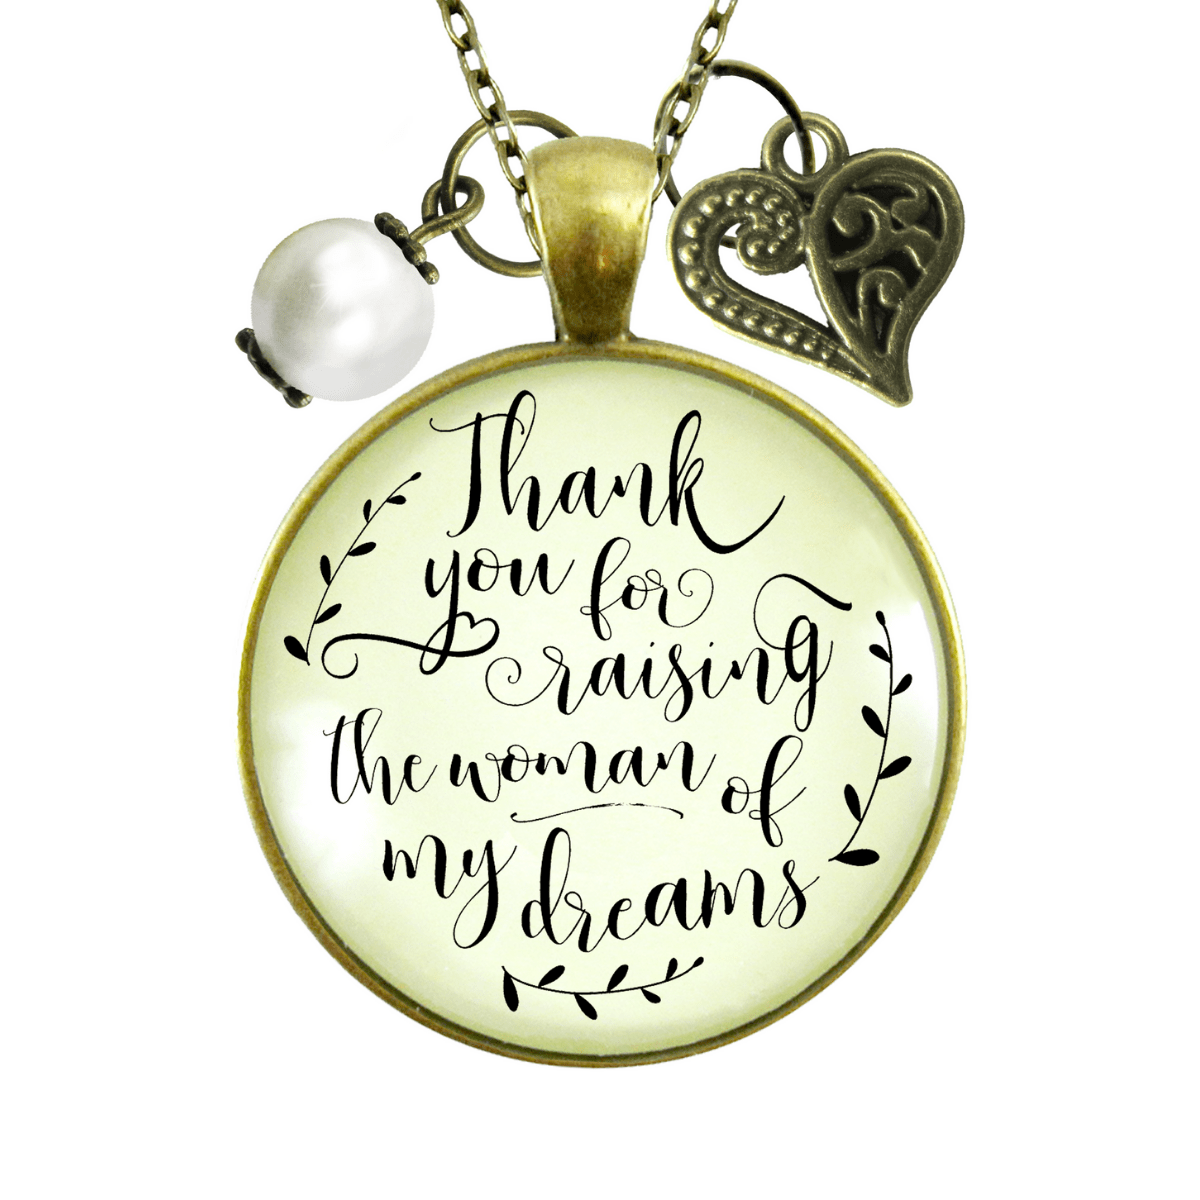 Gutsy Goodness His Mother In Law Necklace Thank You Raising Woman Of Dreams Mom Wedding Jewelry - Gutsy Goodness;His Mother In Law Necklace Thank You Raising Woman Of Dreams Mom Wedding Jewelry - Gutsy Goodness Handmade Jewelry Gifts